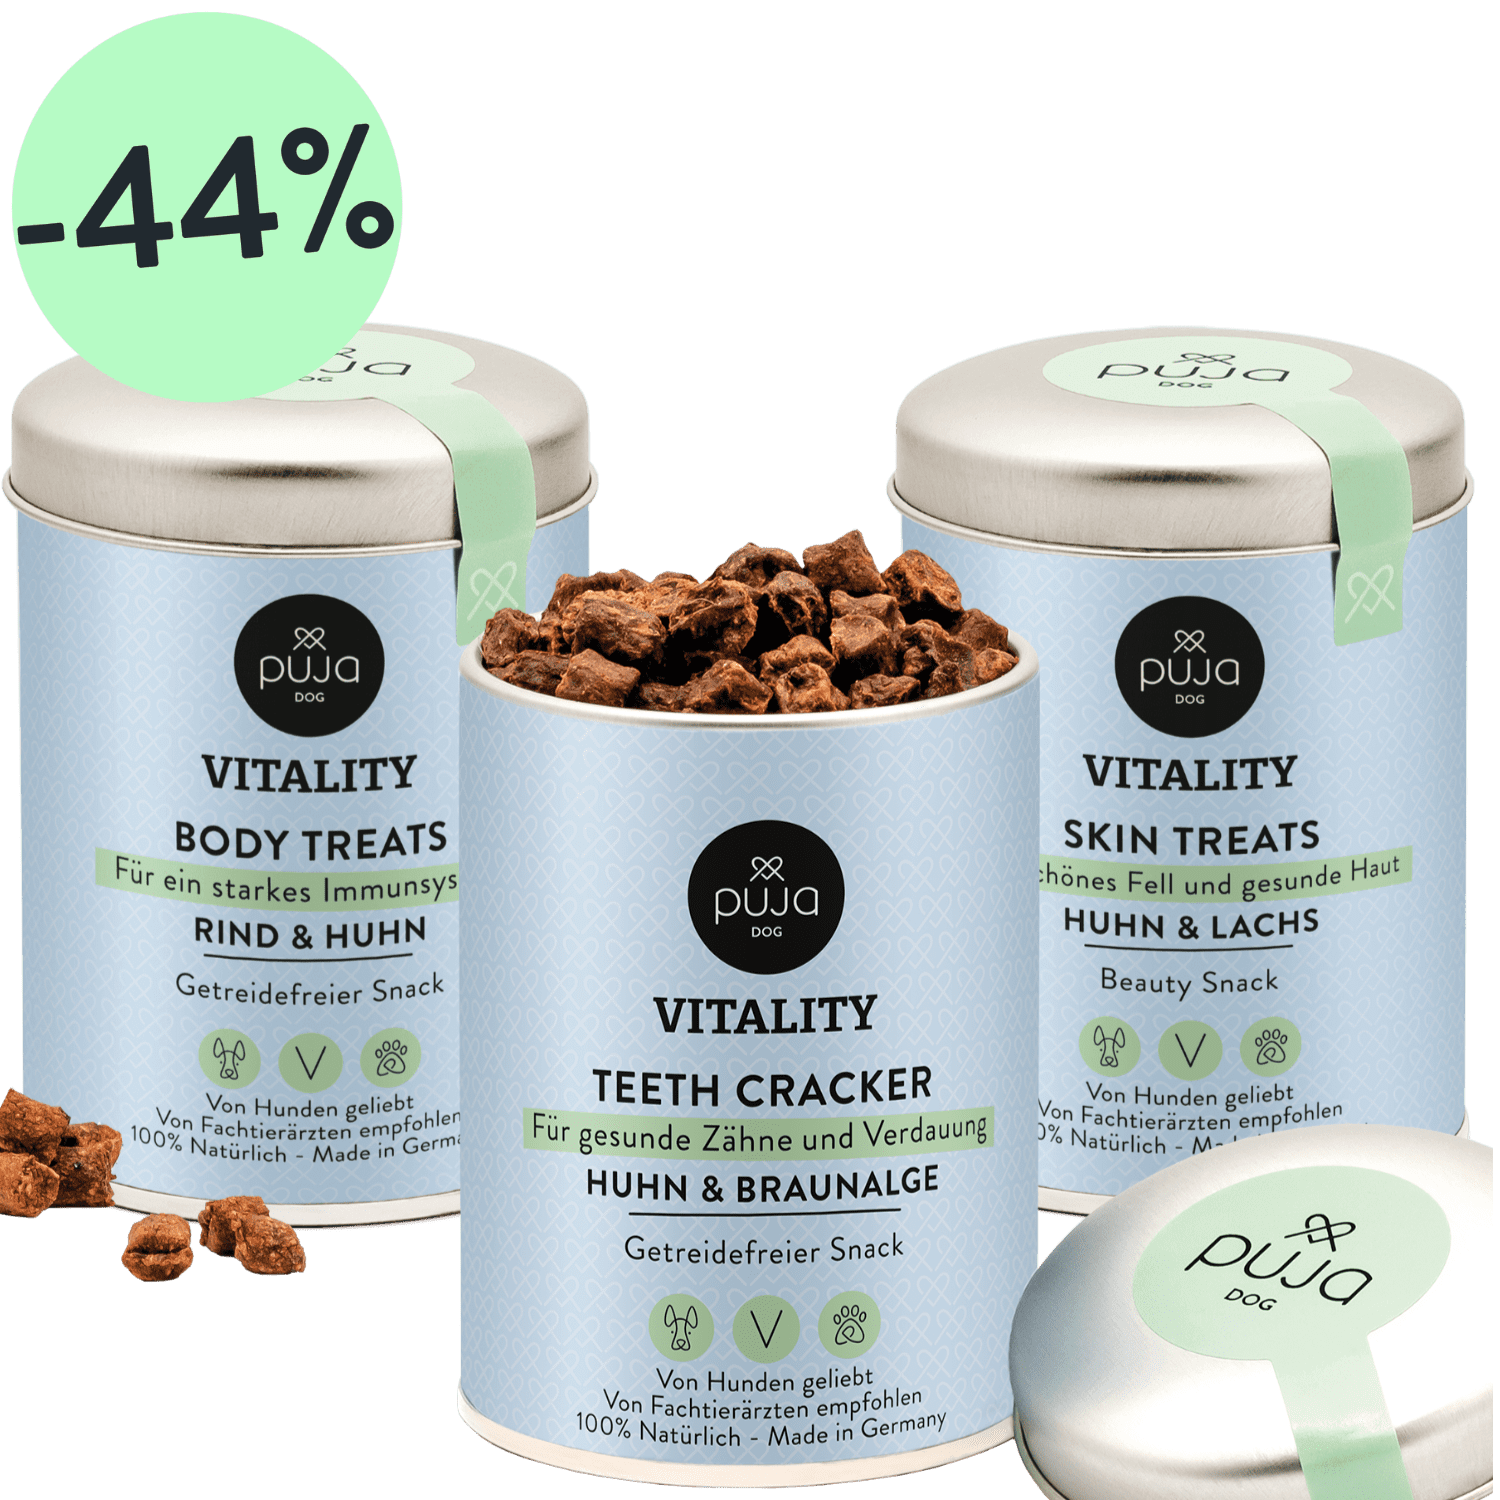 Vitality Teeth for dogs - healthy teeth and digestion 150g